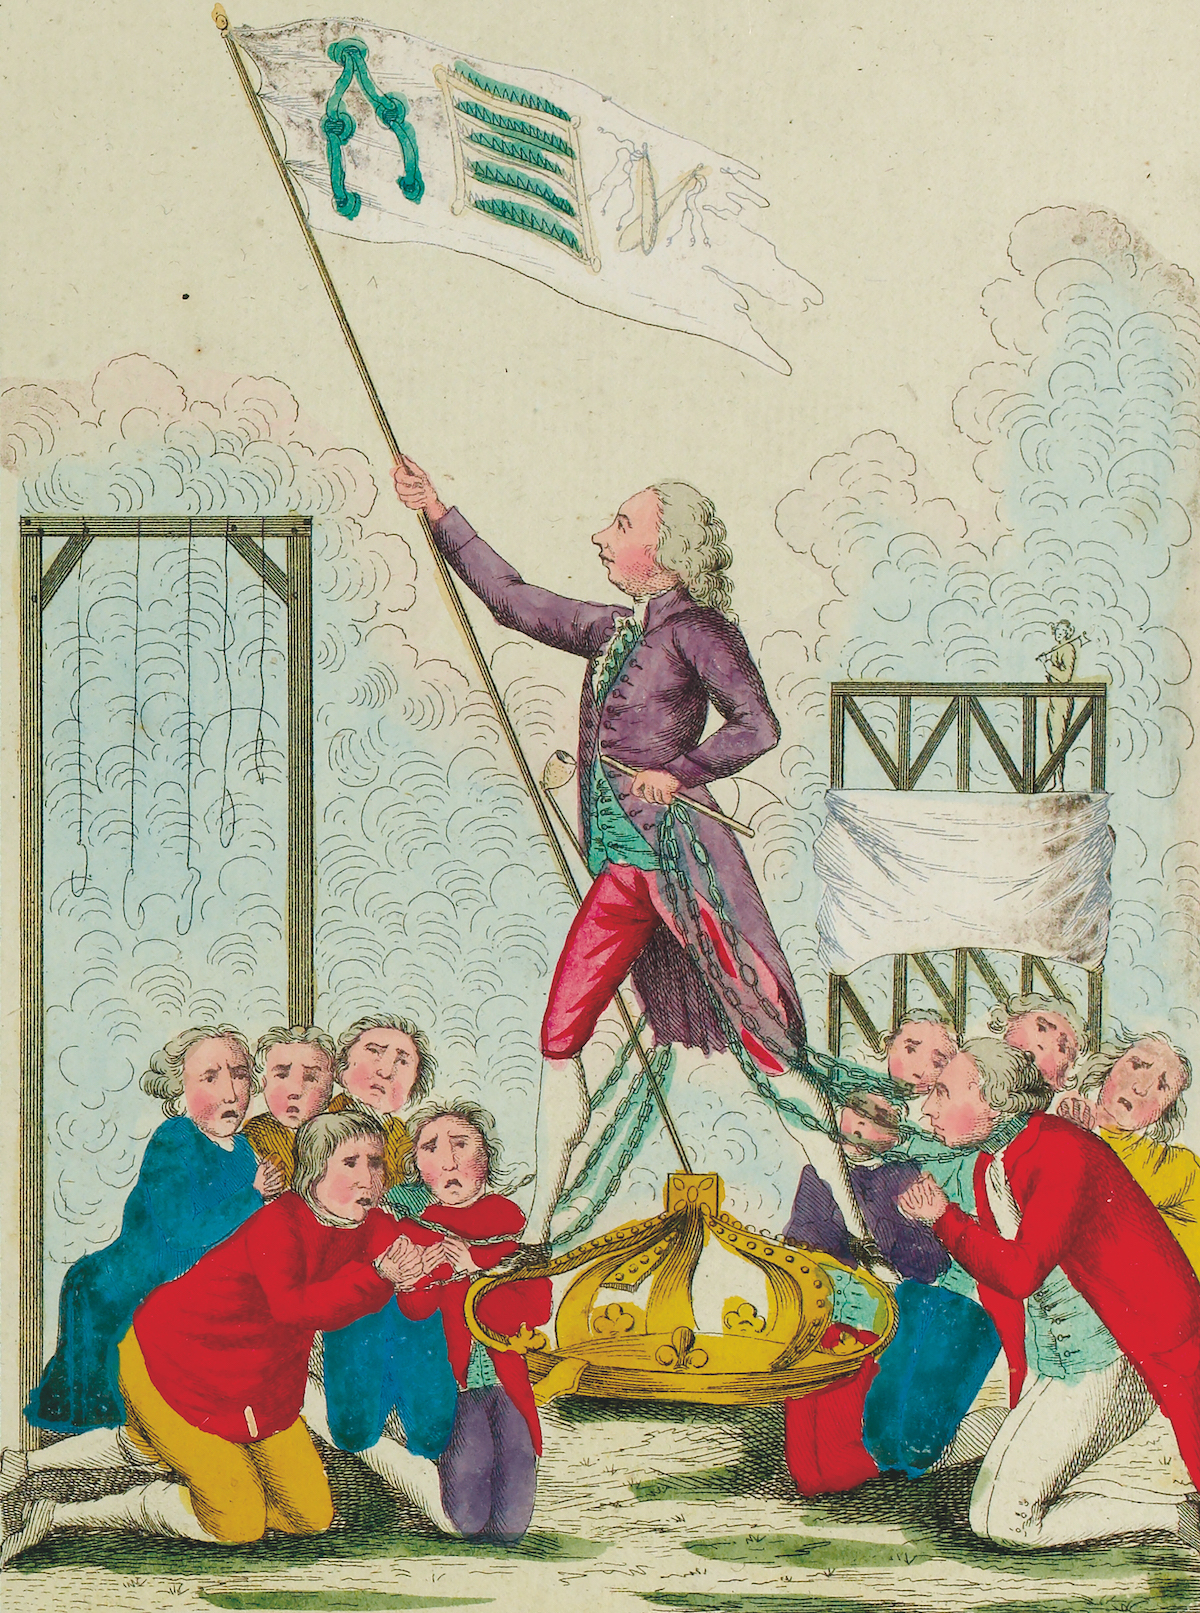 Constitution Angleterre, showing William Pitt standing on the British crown, French response to Gillray, c.1795. Musée Carnavalet, Paris.